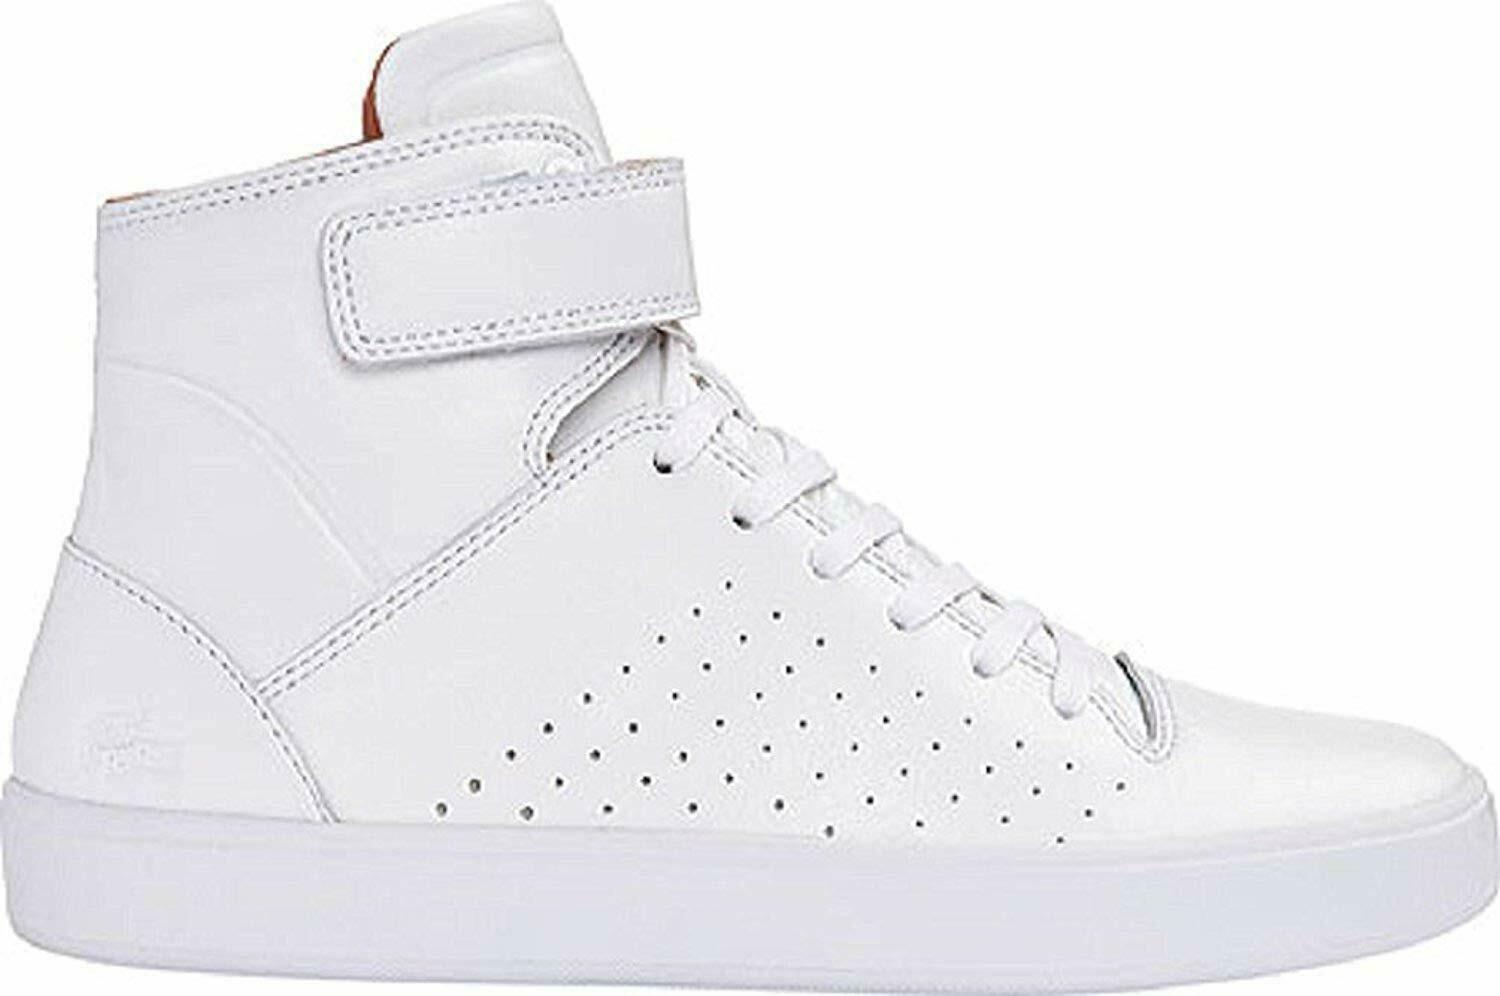 Lacoste Women's Tamora Hi 116 2 High Top Sneaker,White Leather Size US 9 - SVNYFancy